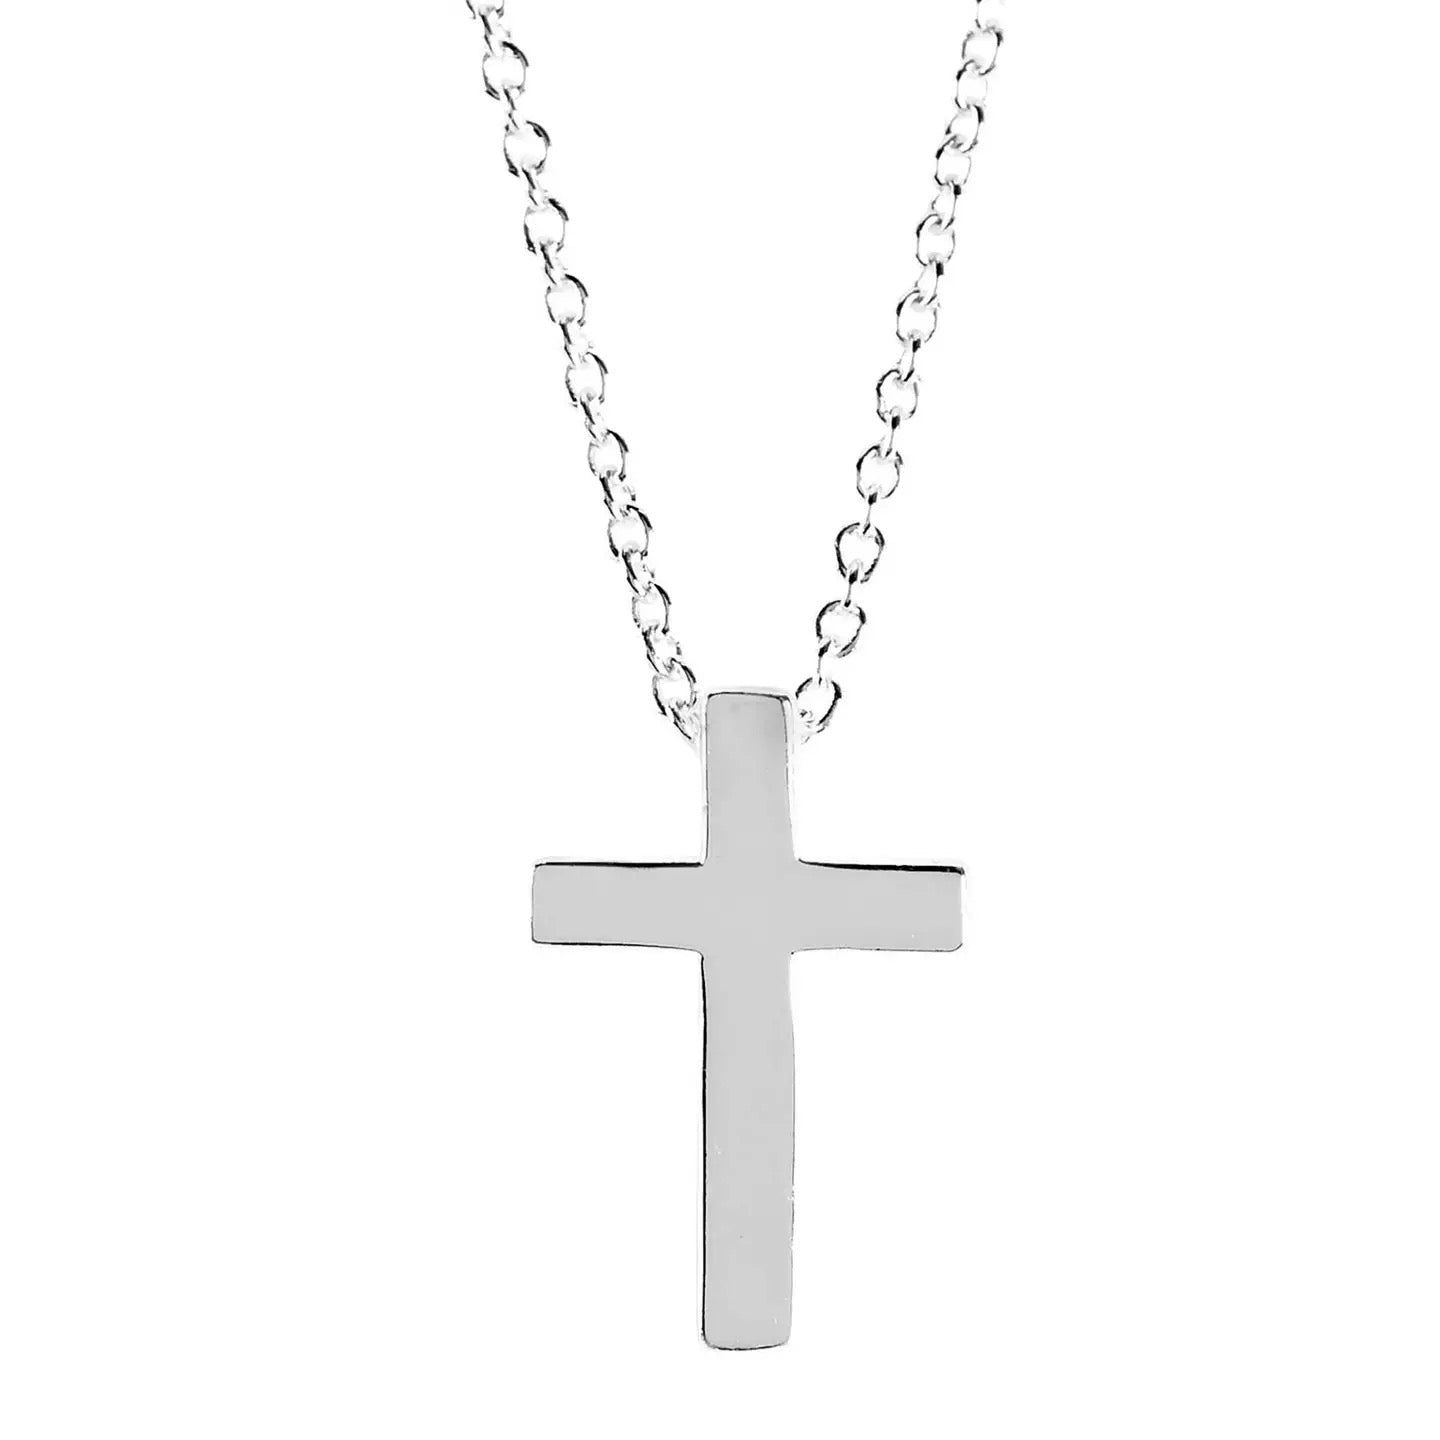 As for you be strong Necklace (2 Chron 15:7)